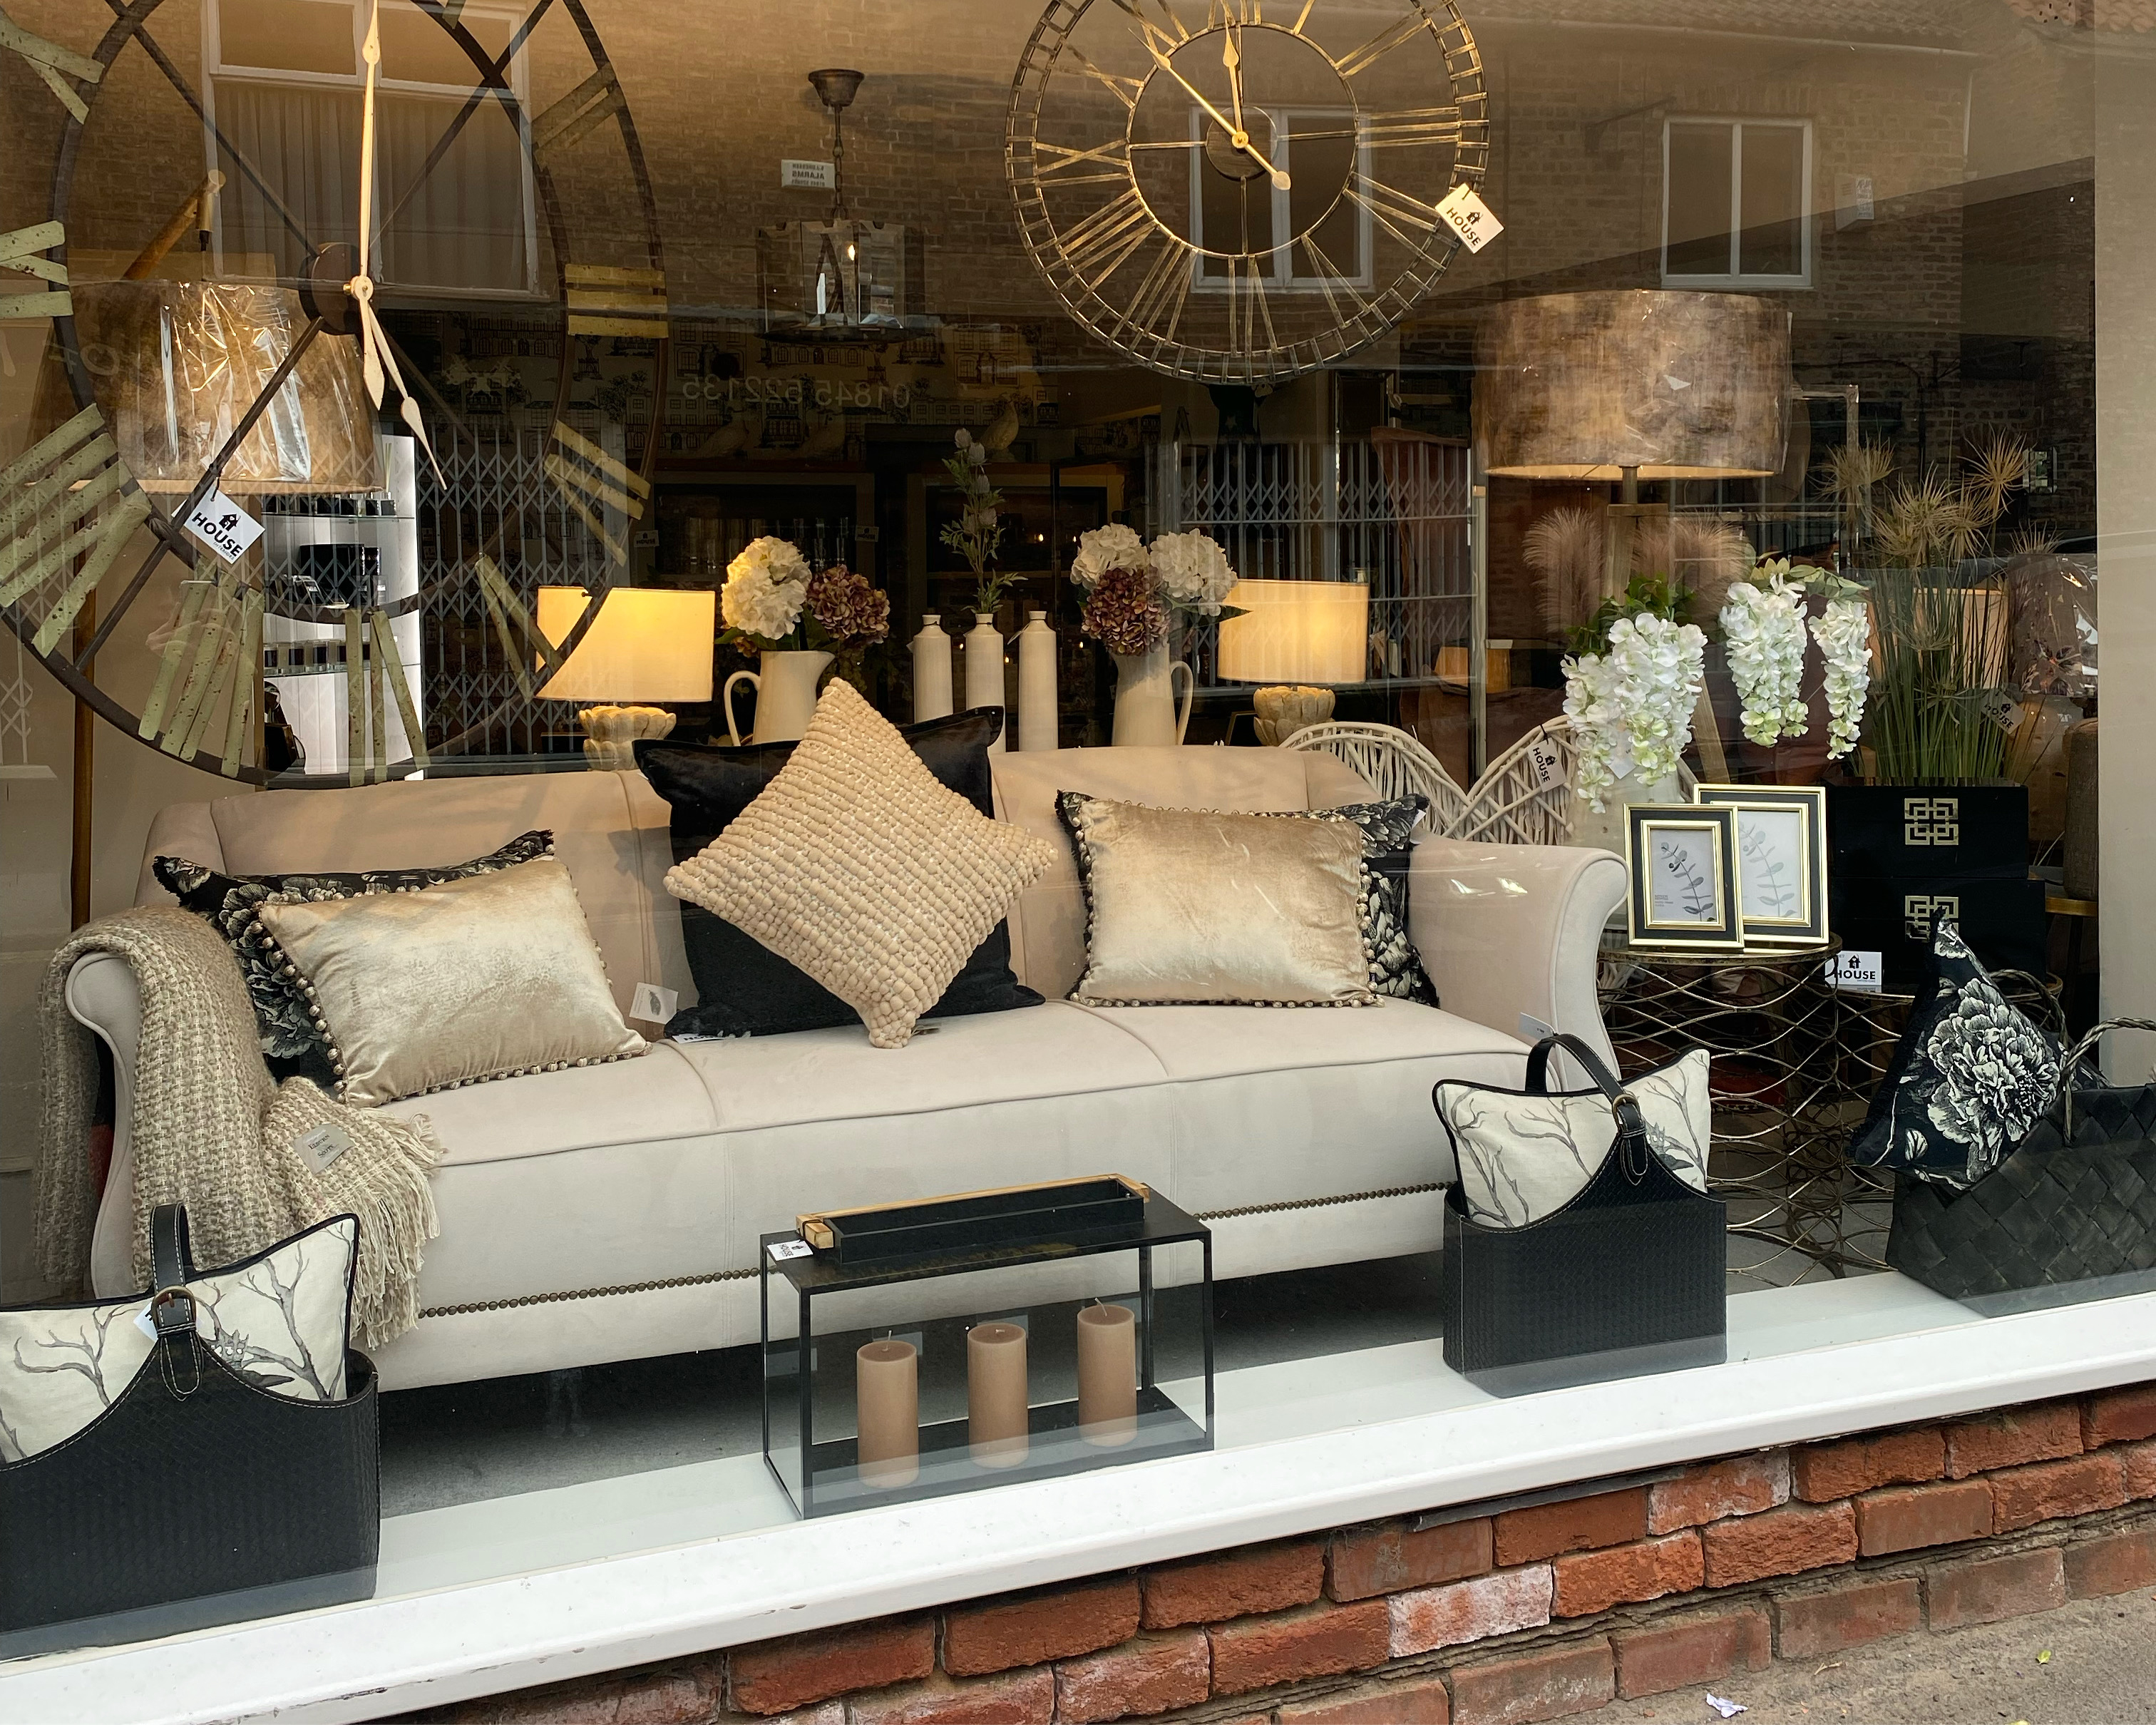 We stock amazing home accessories and gift-ware. In store we have everything to make your house look and smell amazing.